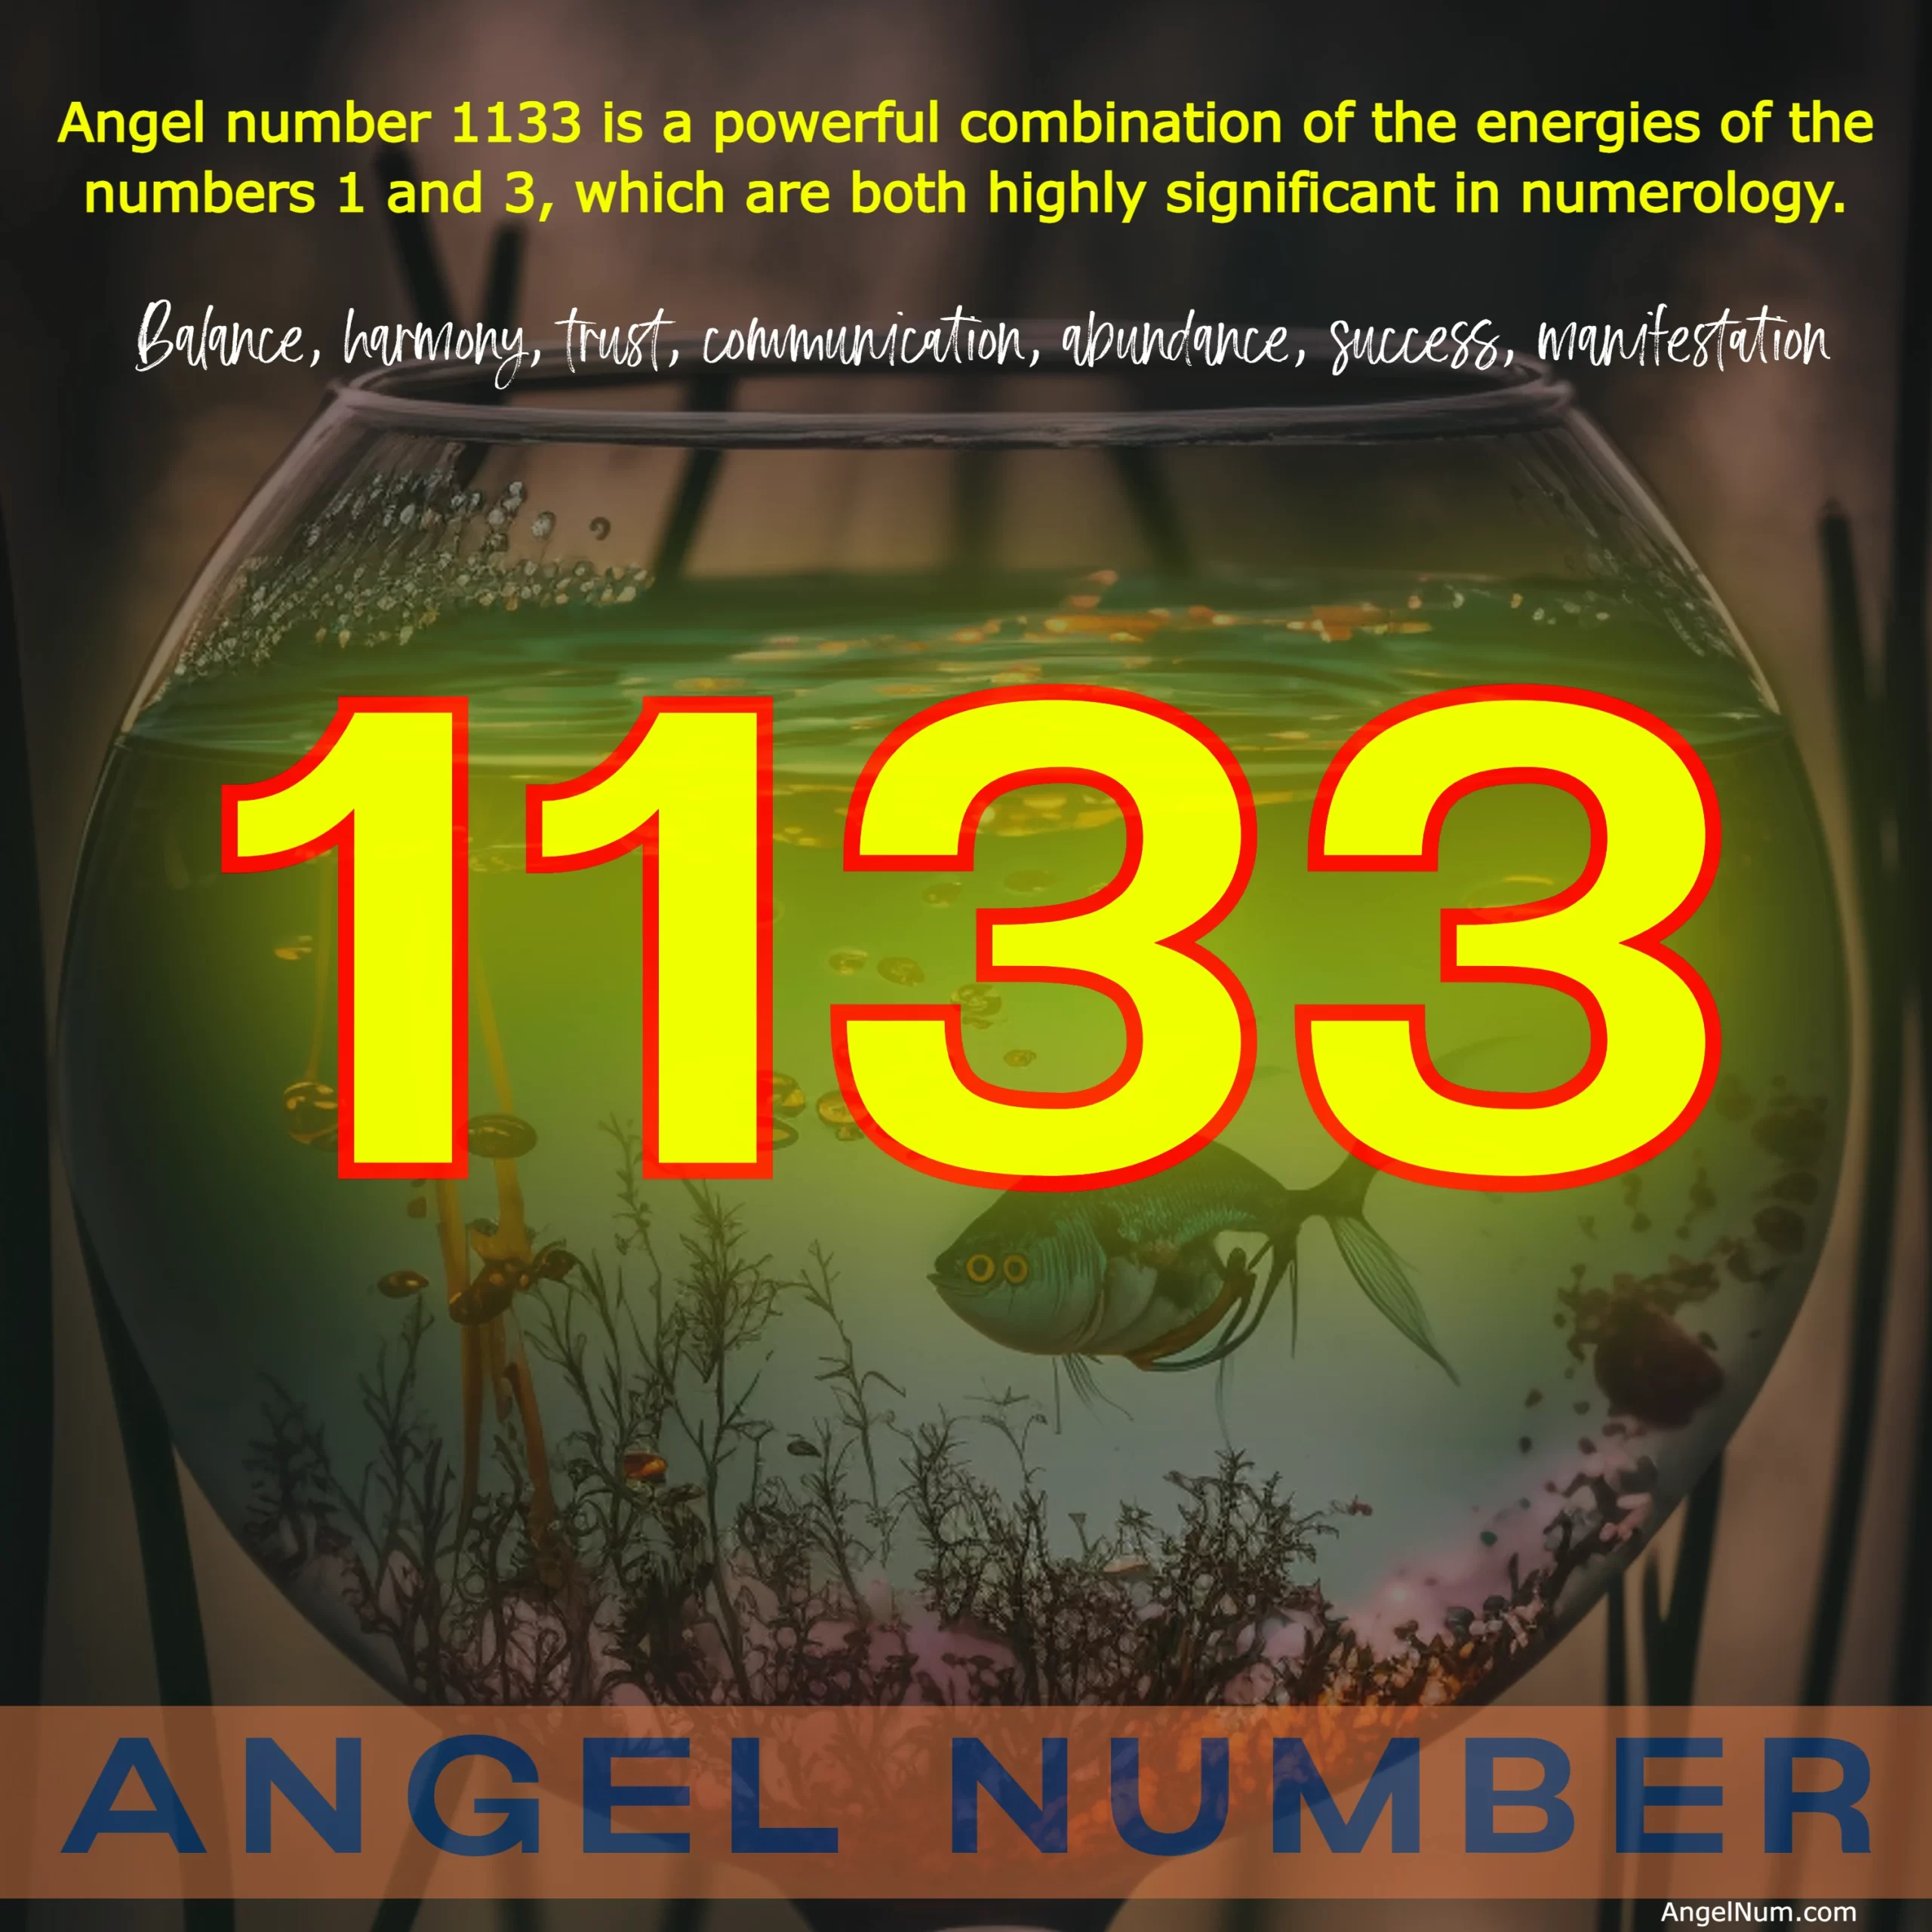 Unleashing Creativity and Abundance: The Meaning of Angel Number 1133